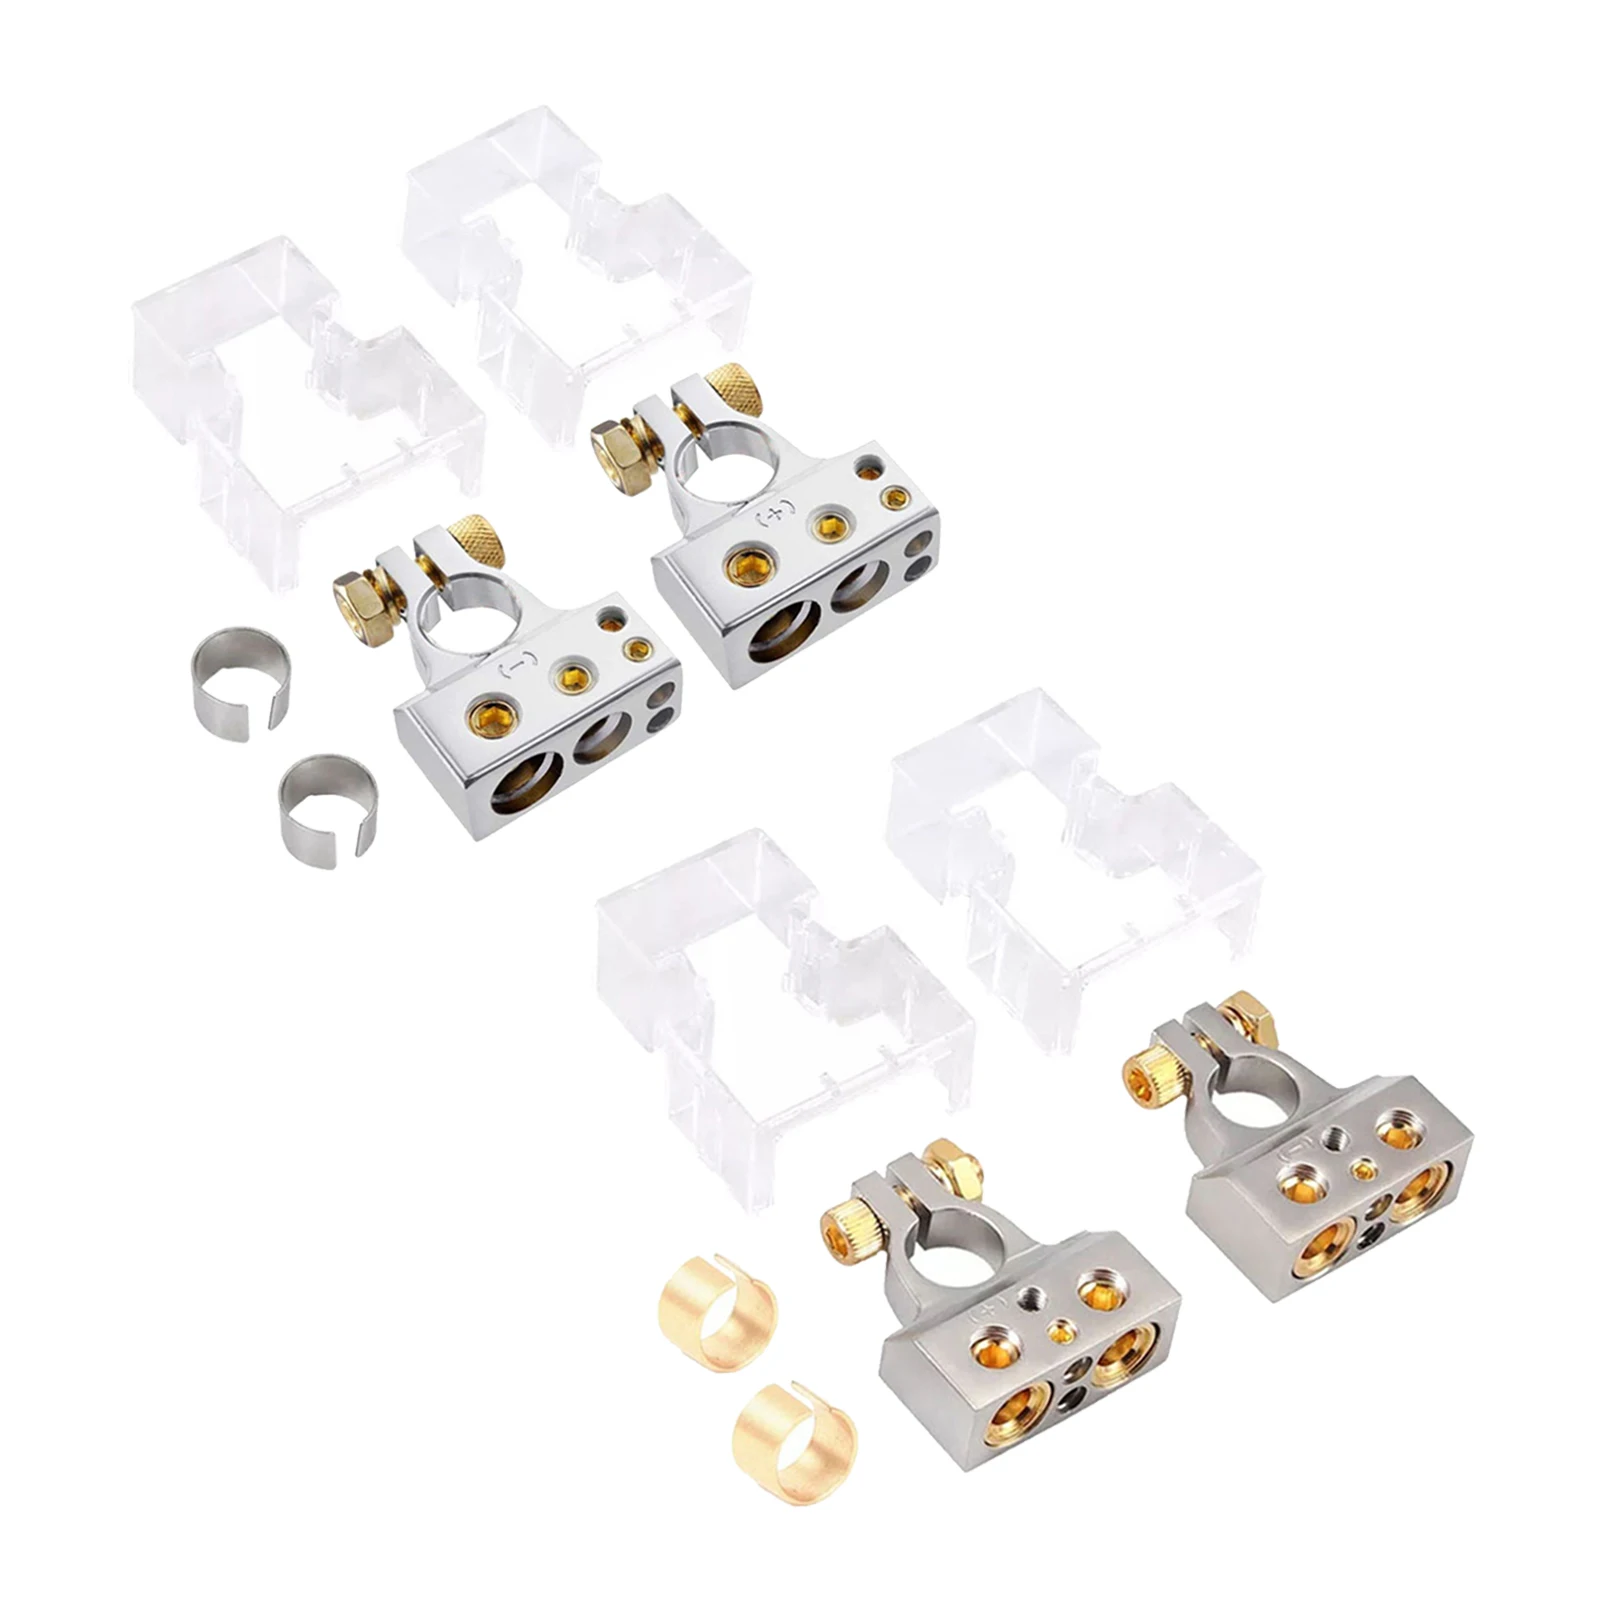 Positive & Negative Battery Terminal Clamp Terminals Connectors Kit with Cover Pair Kit